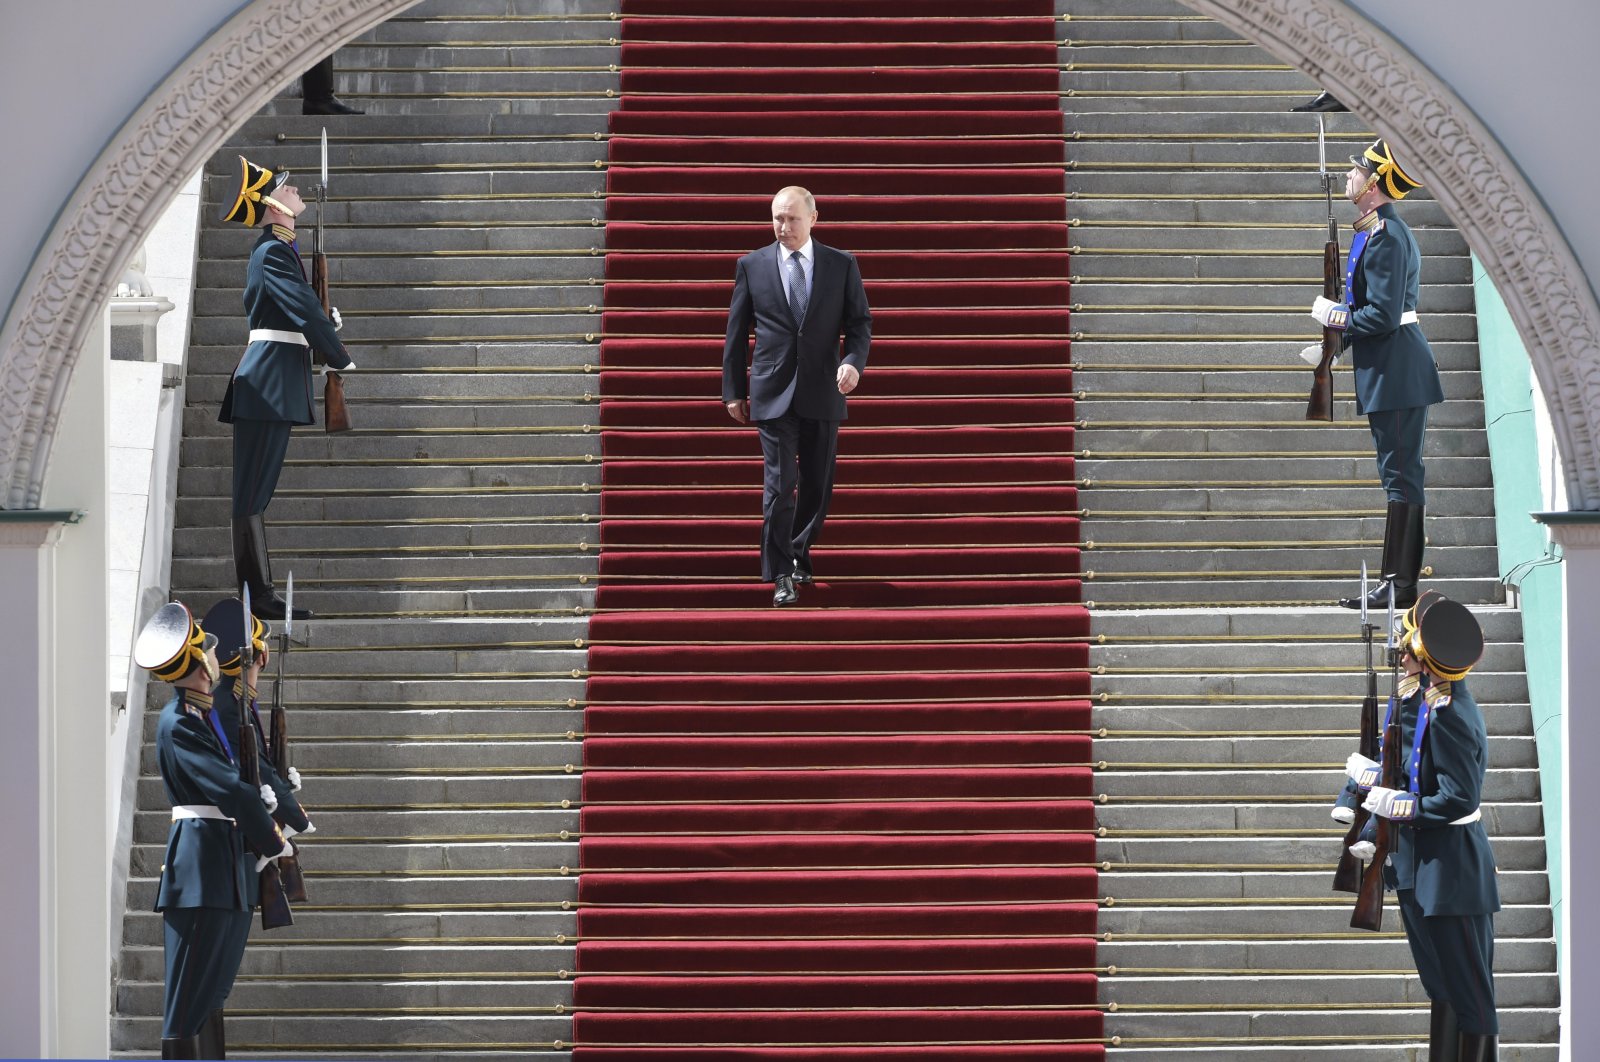 Vladimir Putin walks after his inauguration ceremony for a new term as Russia's president at the Kremlin in Moscow, Russia, May 7, 2018. (Kremlin Pool Photo via AP)